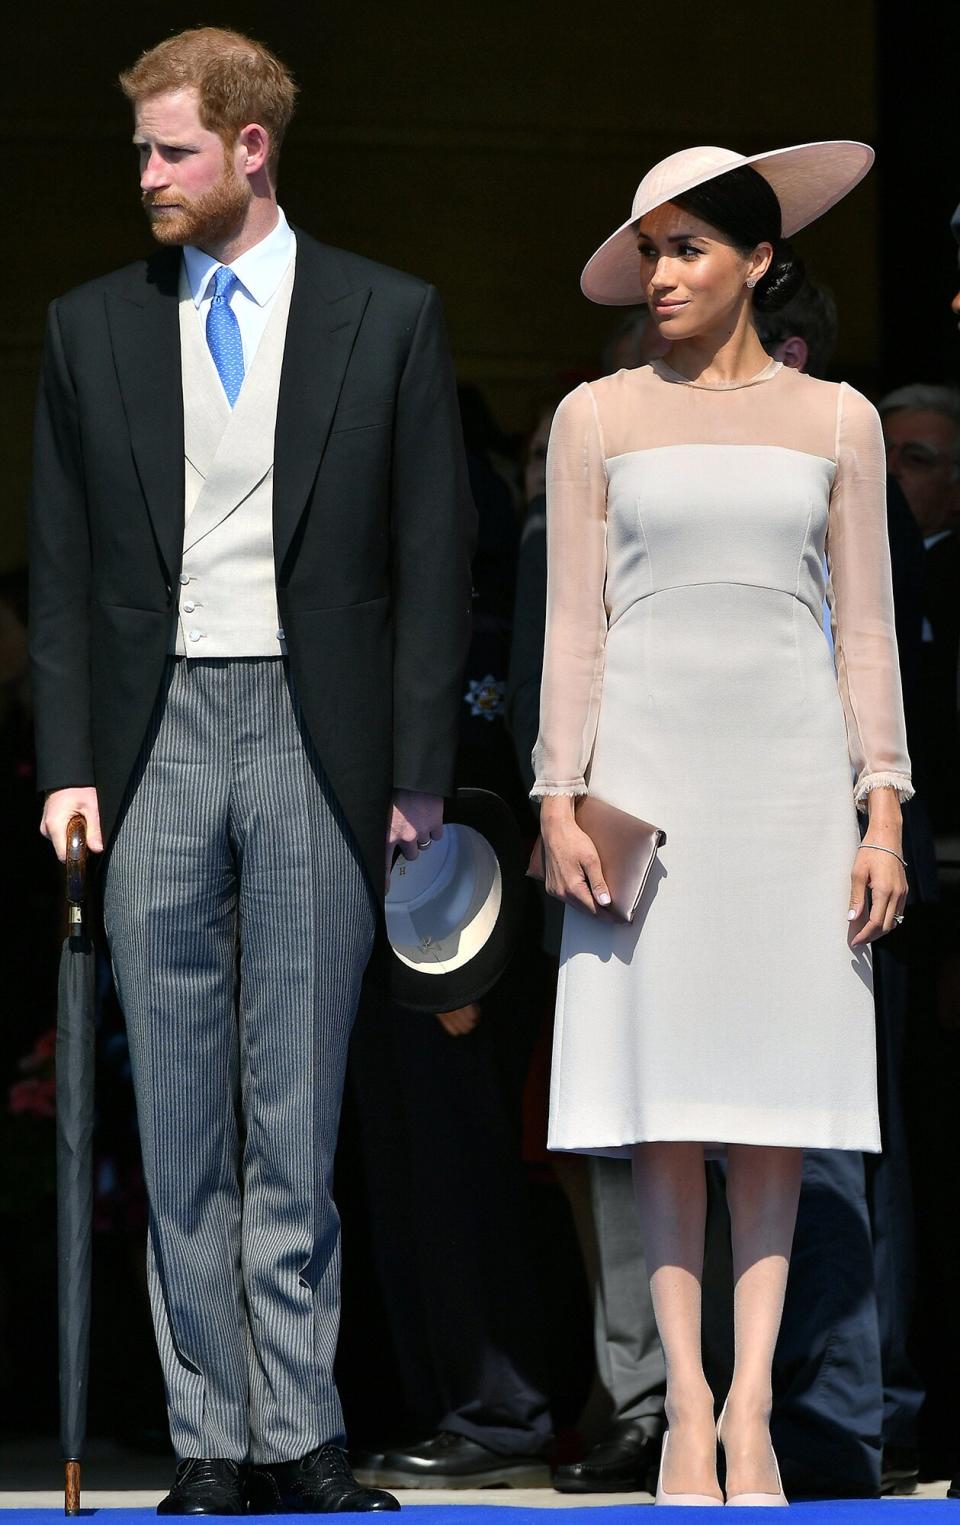 Prince Harry, Duke of Sussex (L), and his new wife, Britain's Meghan, Duchess of Sussex, attend the Prince of Wales's 70th Birthday Garden Party at Buckingham Palace in London on May 22, 2018. - The Prince of Wales and The Duchess of Cornwall hosted a Garden Party to celebrate the work of The Prince's Charities in the year of Prince Charles's 70th Birthday